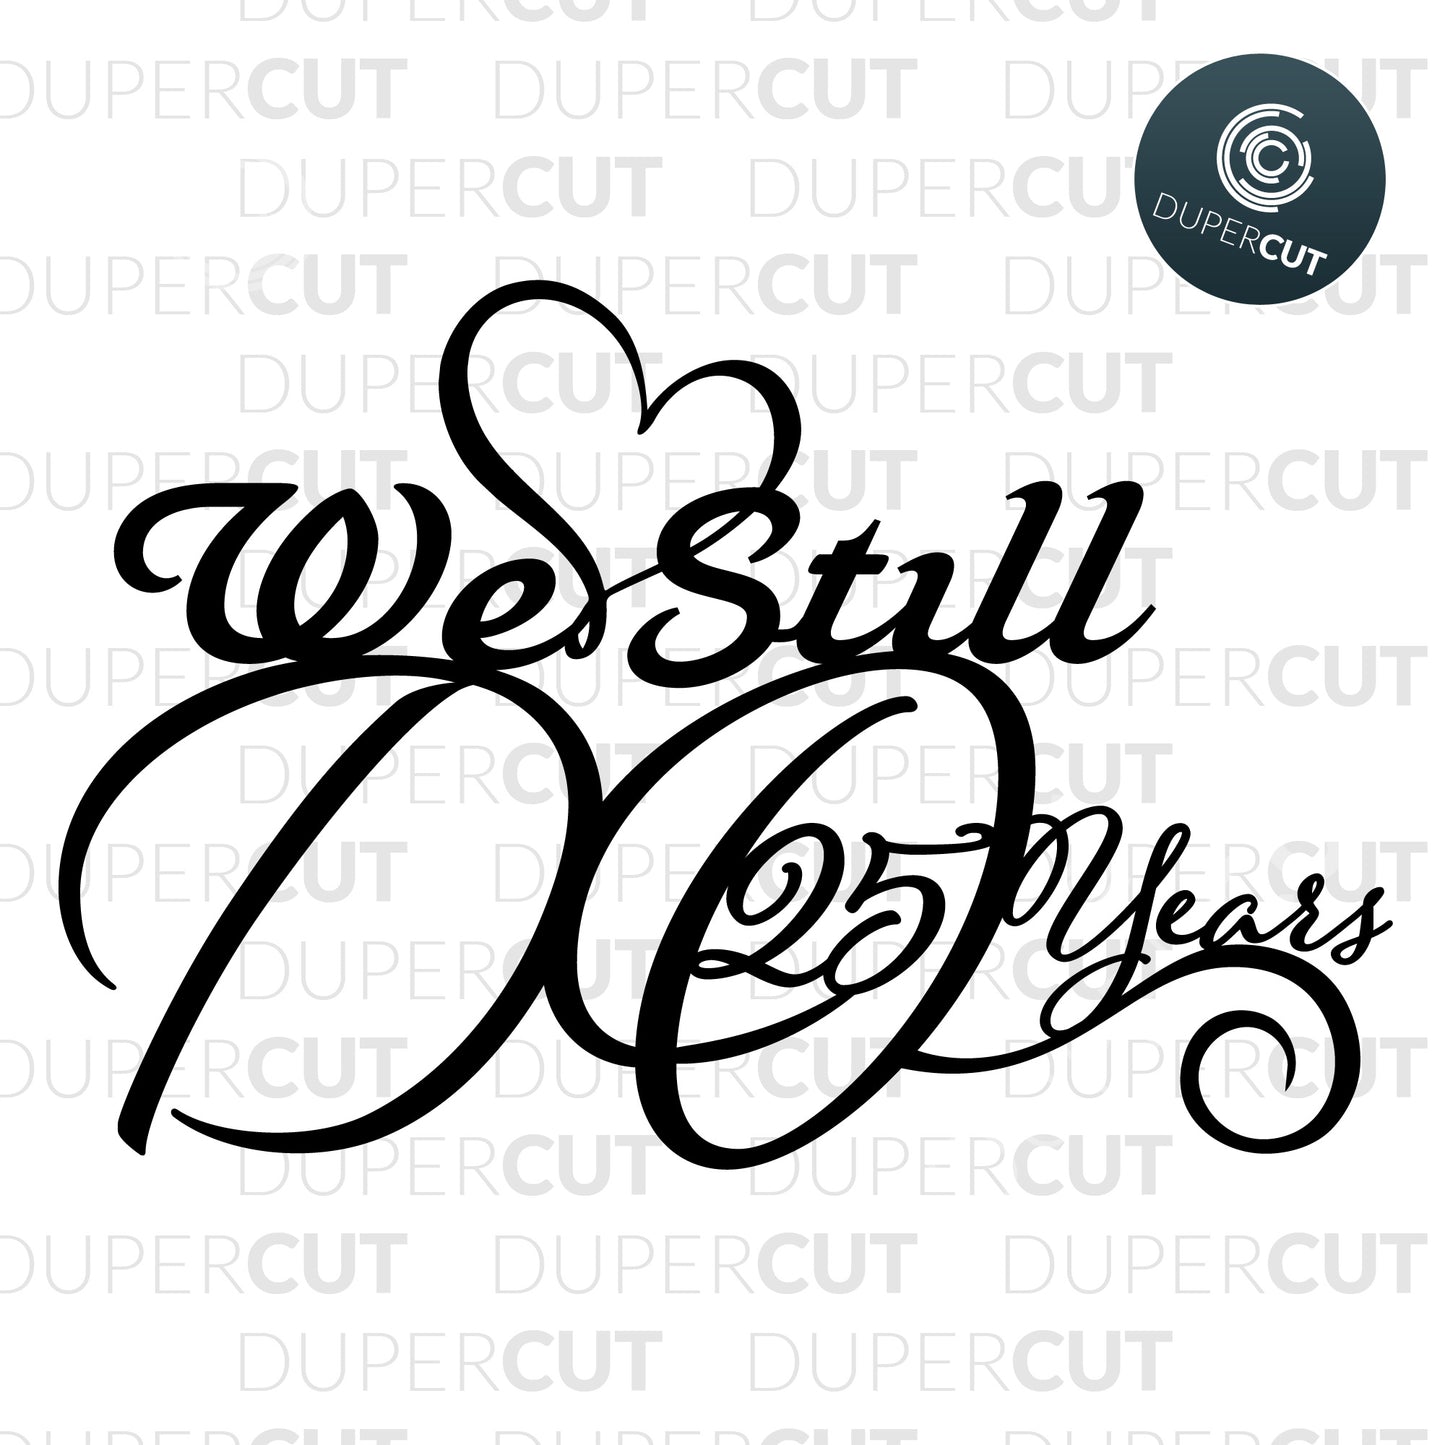 25 years wedding anniversary cake topper, We still do. Paper cutting template SVG PNG DXF files. For DIY projects Cricut, Glowforge, Silhouette Cameo, CNC Machines.